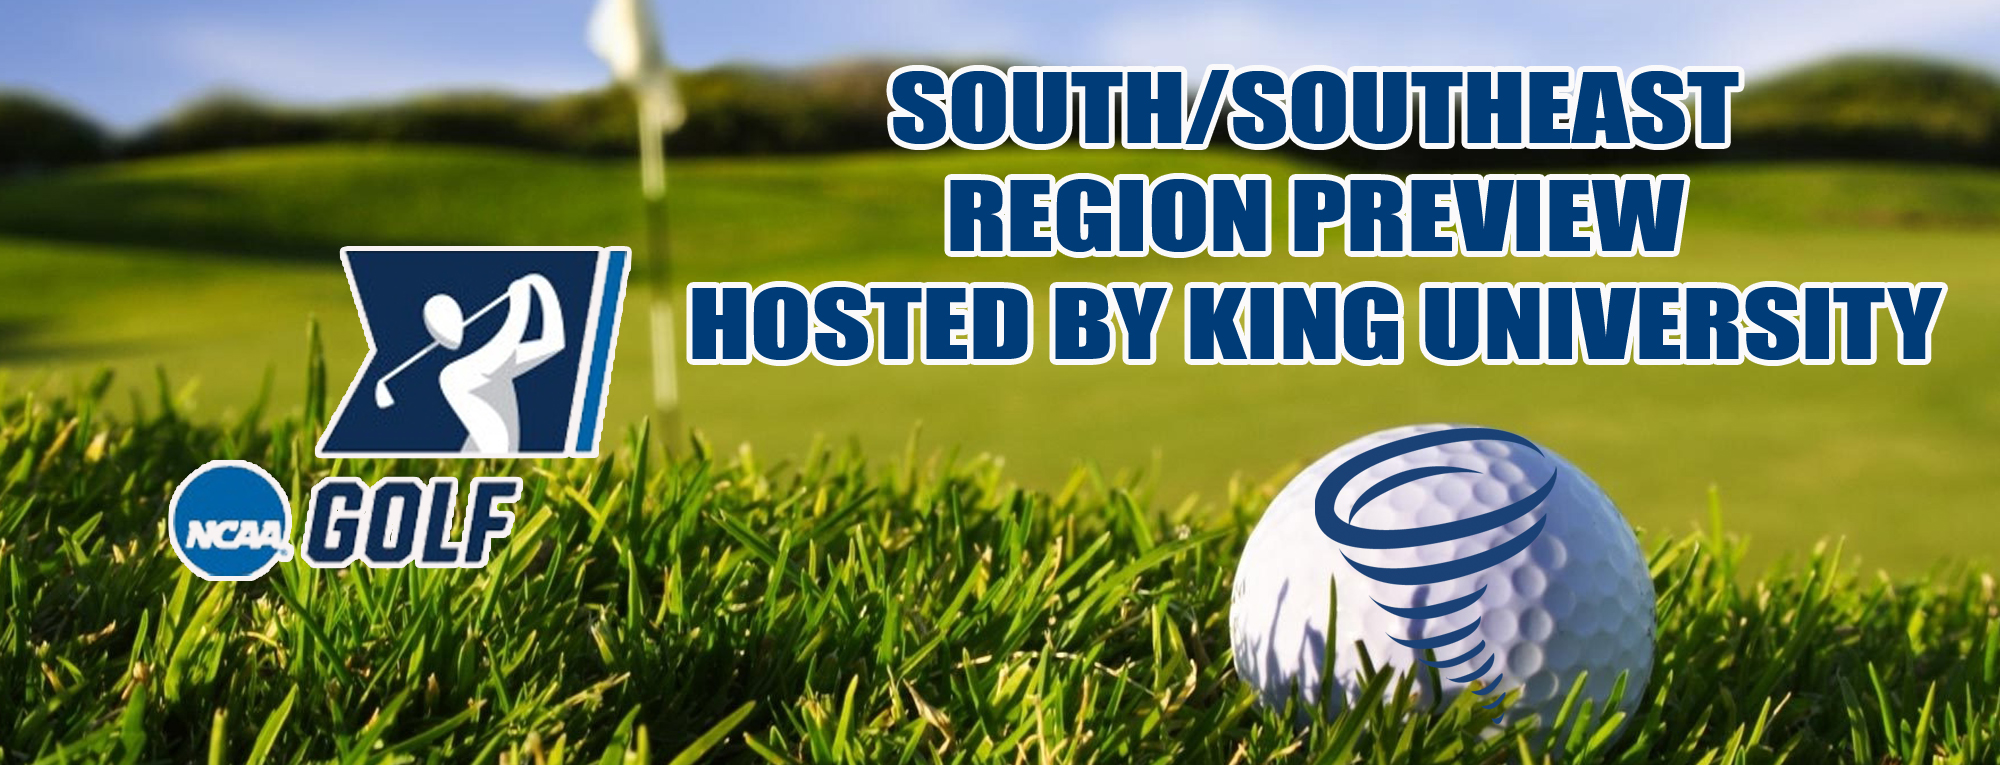 Stephen, Fisher lead Brevard at South/Southeast Region Preview Tournament